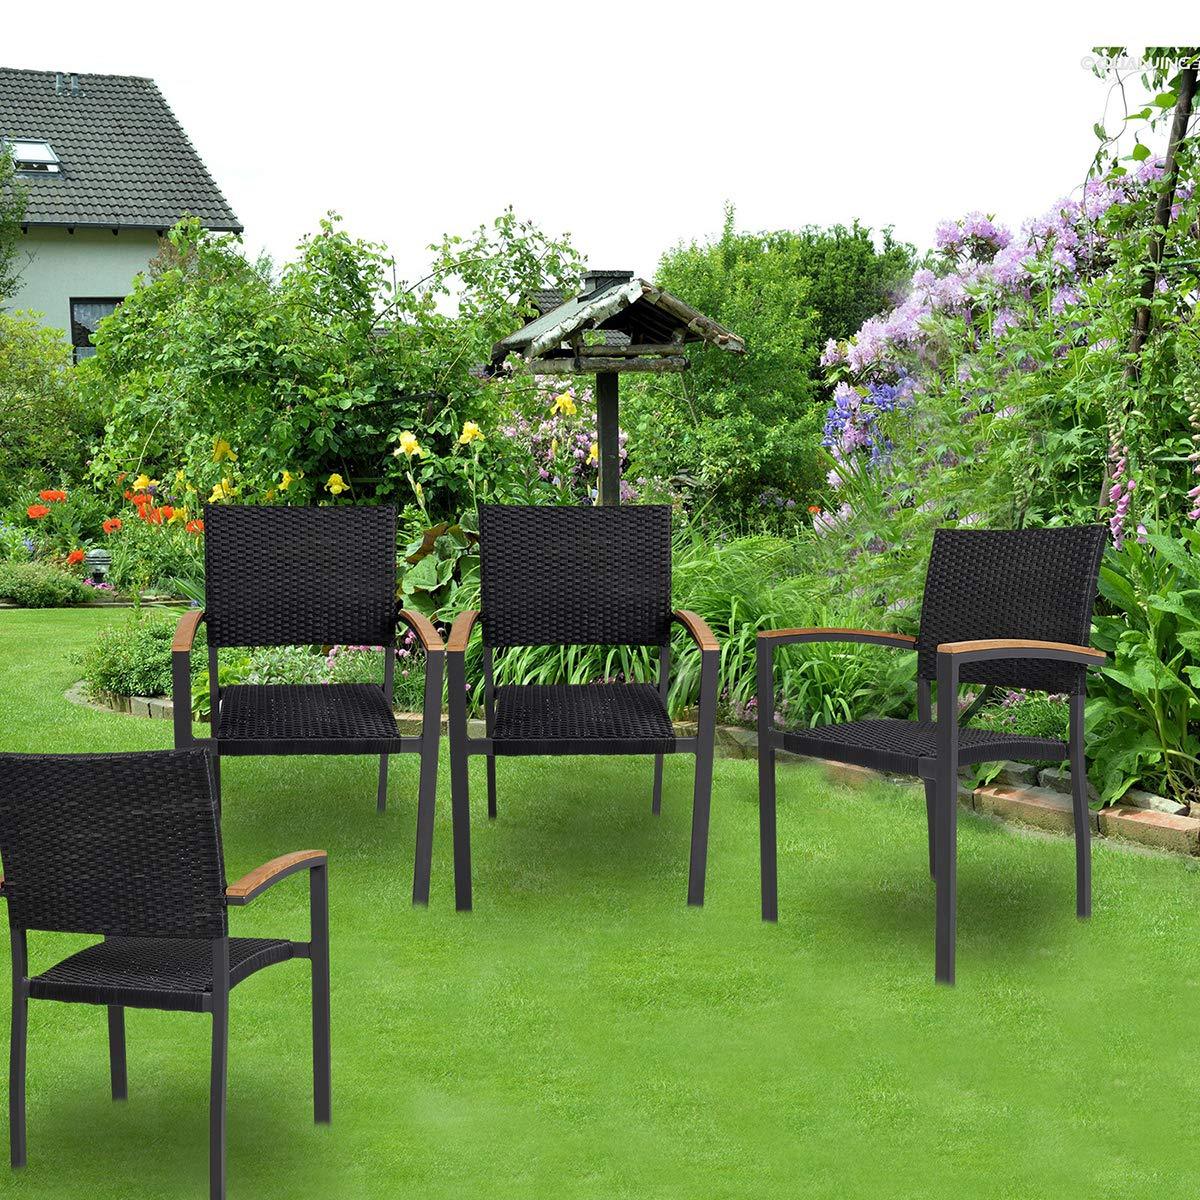 Bosonshop 4 Pack Outdoor Patio All Weather PE Wicker Dining Chairs with Aluminum Alloy Frame